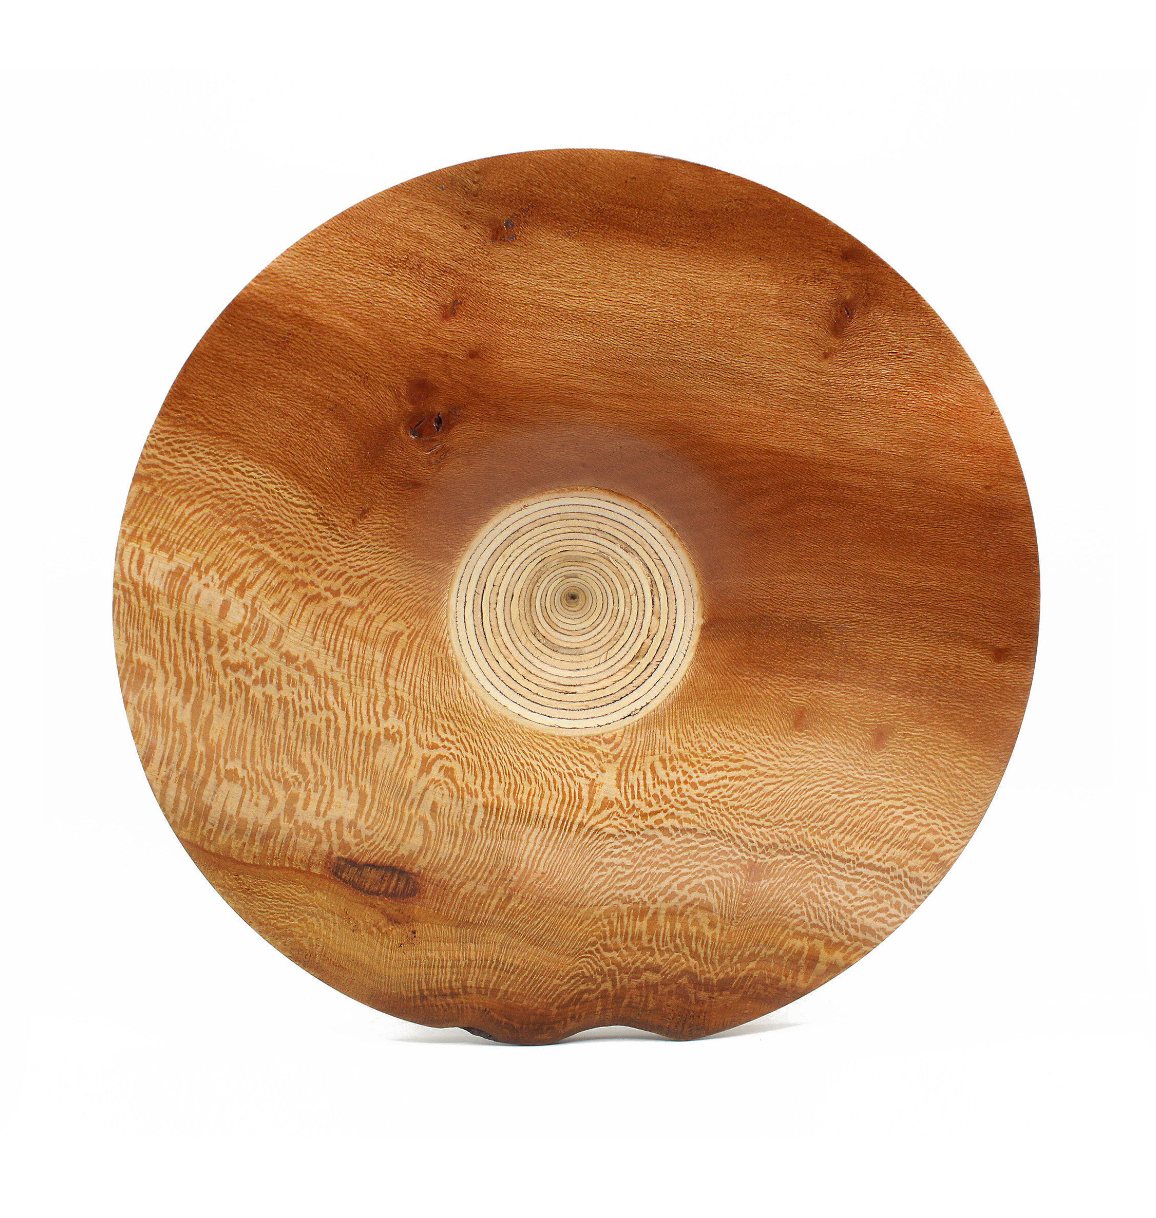 luxury wooden tray handmade design event horizon plant tray sculpted ethical recycled